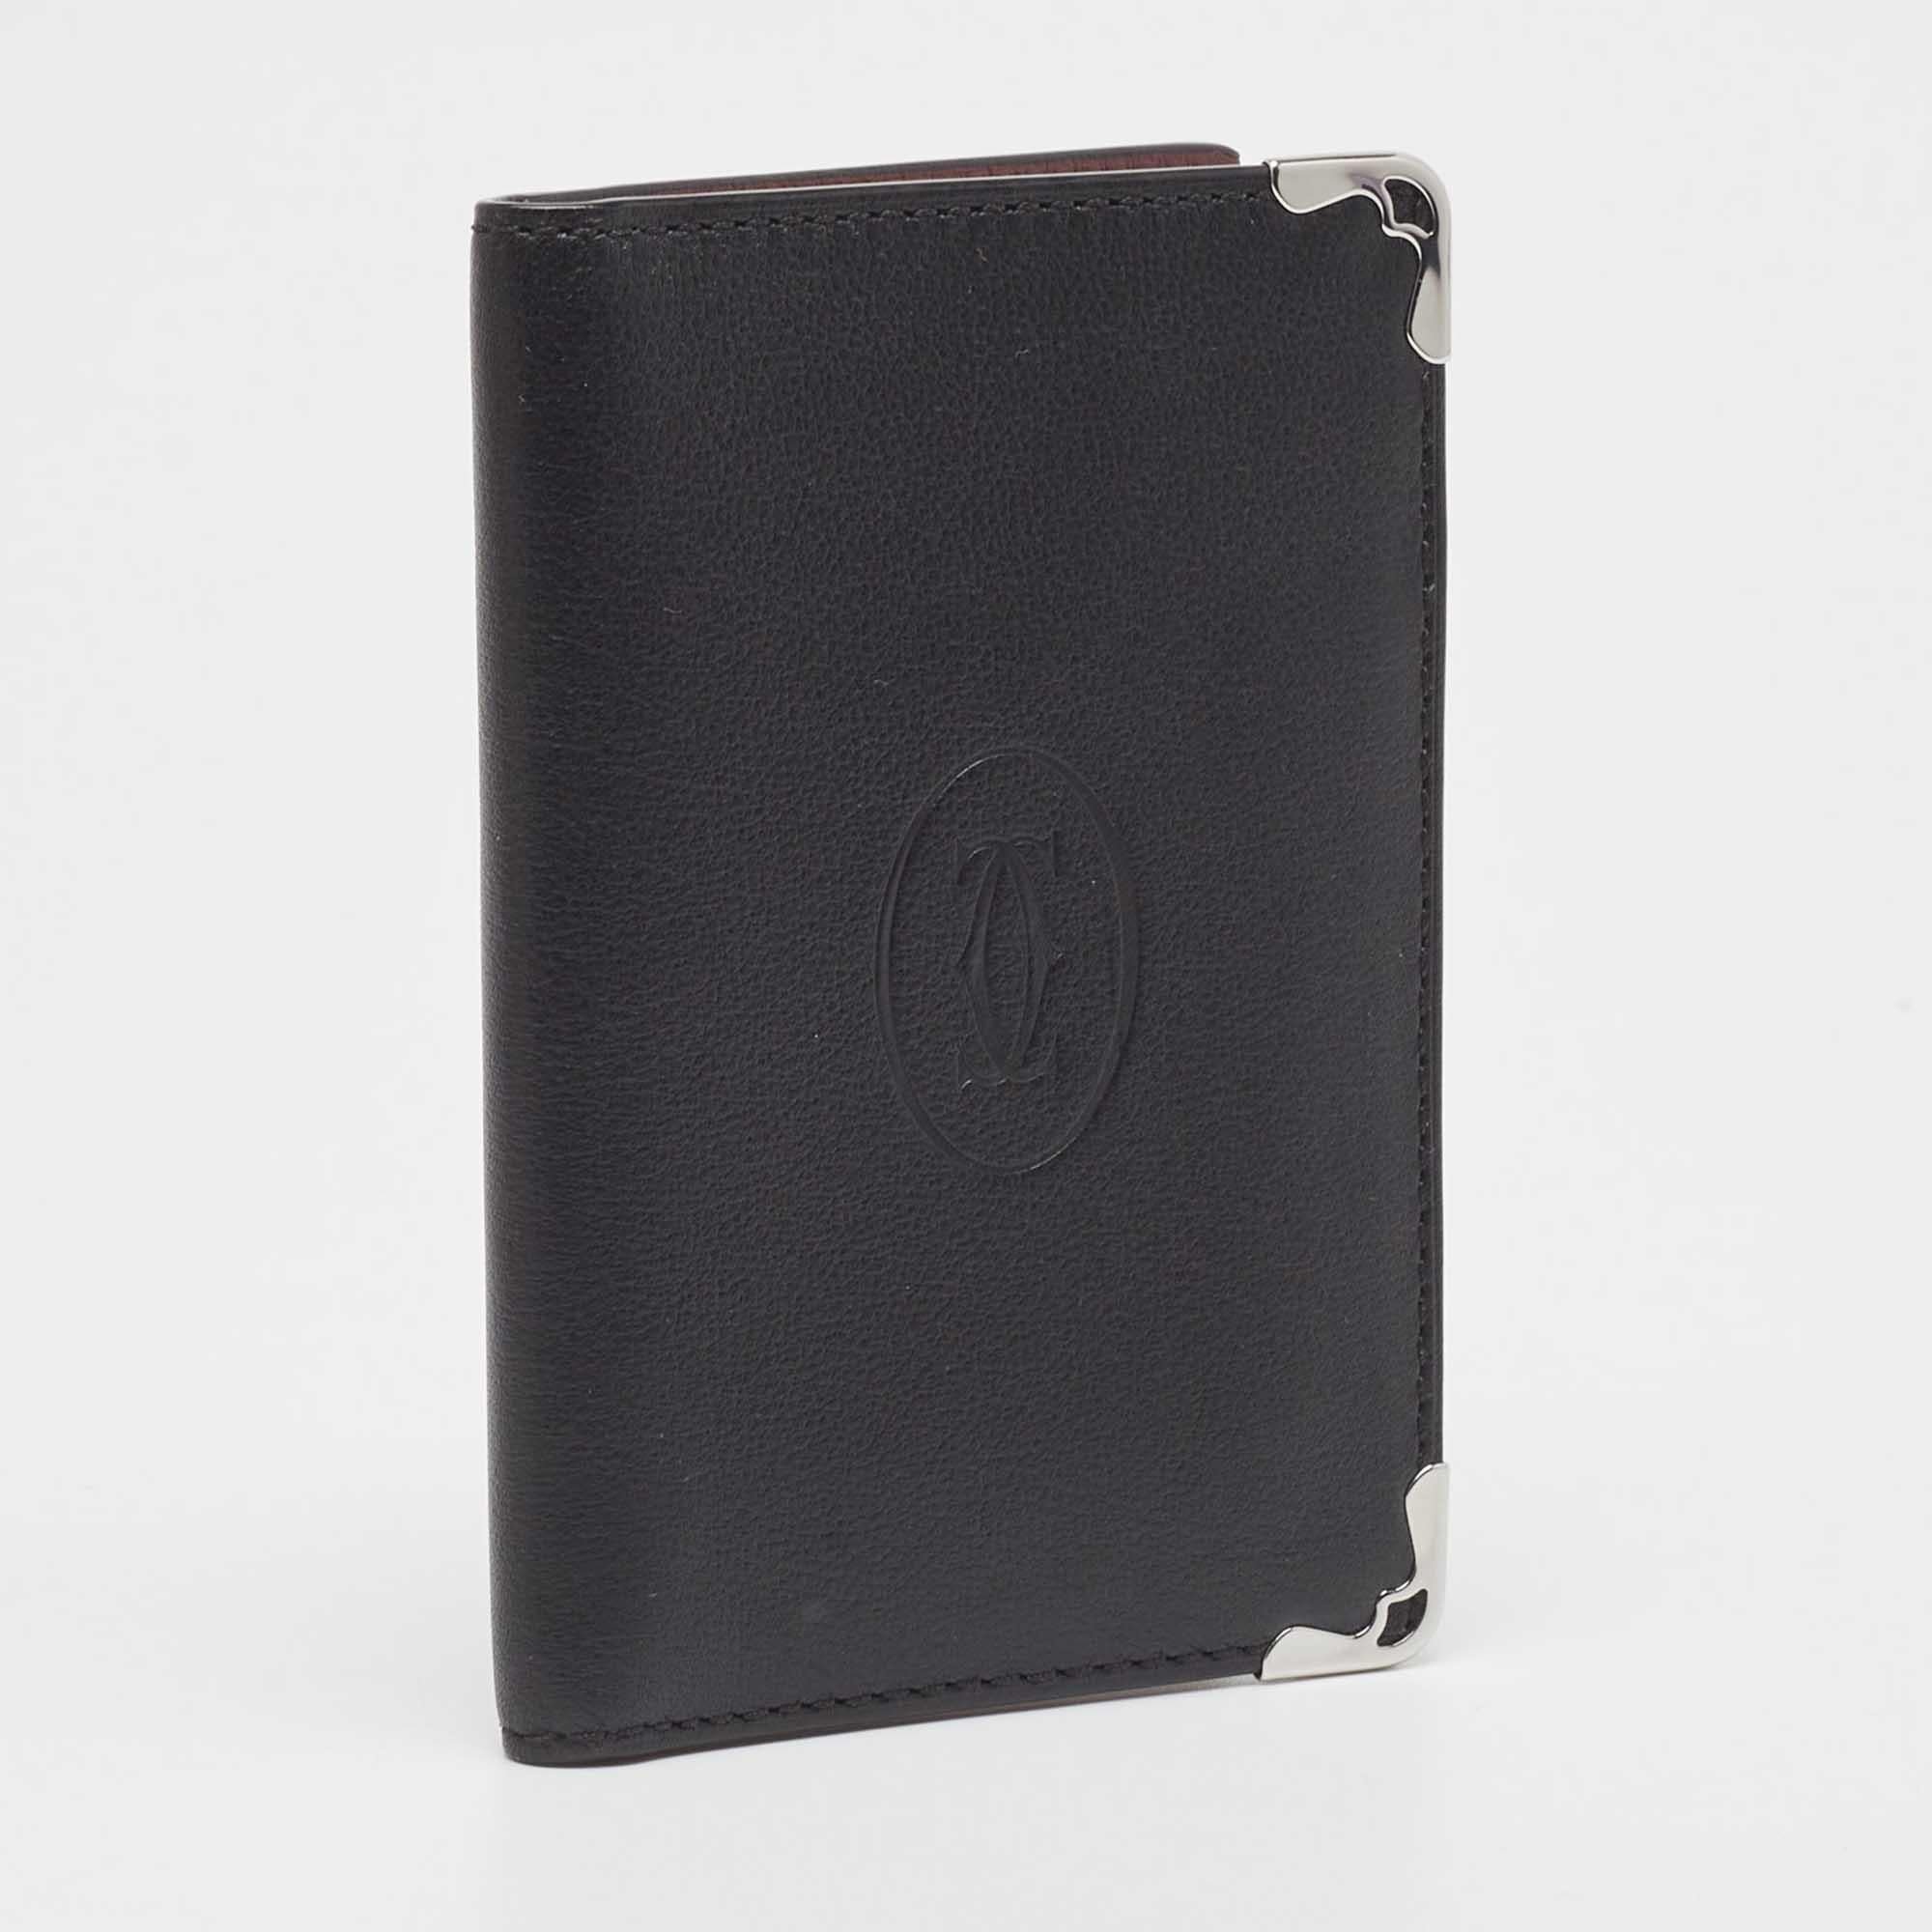 The Cartier card holder combines elegance and functionality in a sleek design. Crafted from leather, it features a black shade and silver-tone metal accents.

